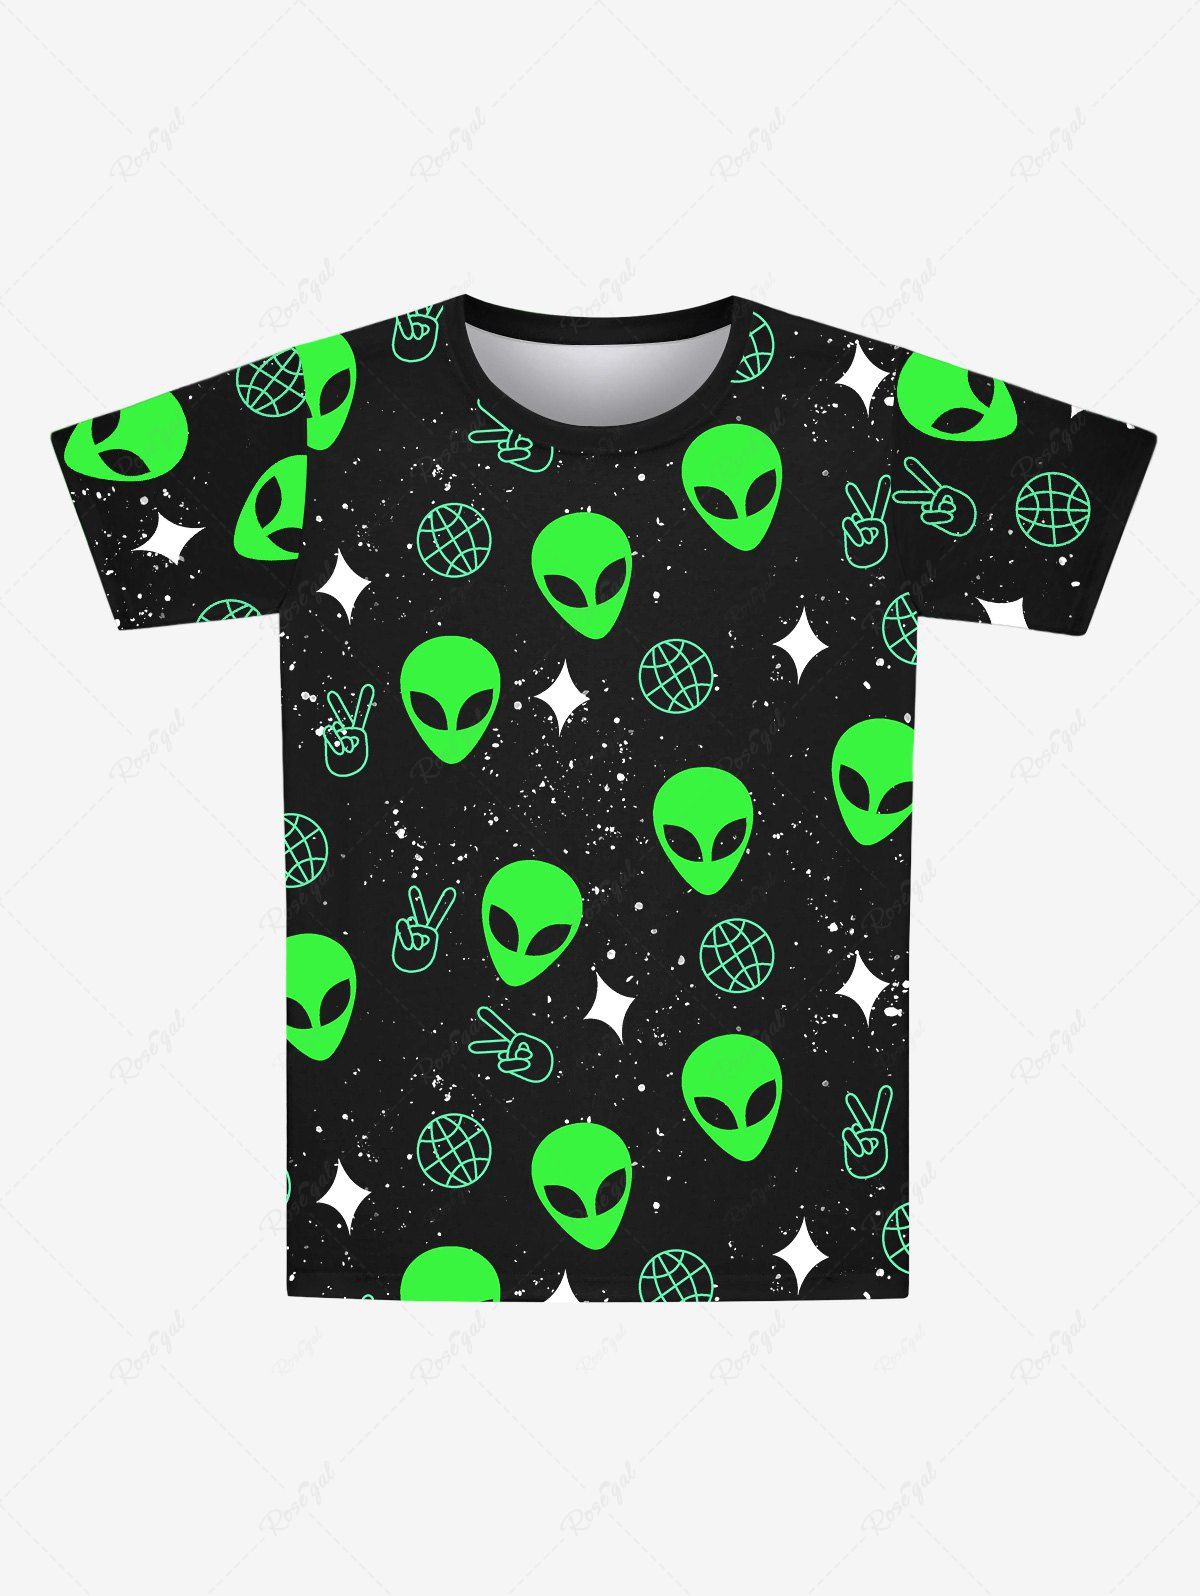 Fancy Gothic Alien Moon Star Victory Gesture Galaxy Print Short Sleeves T-shirt For Men  